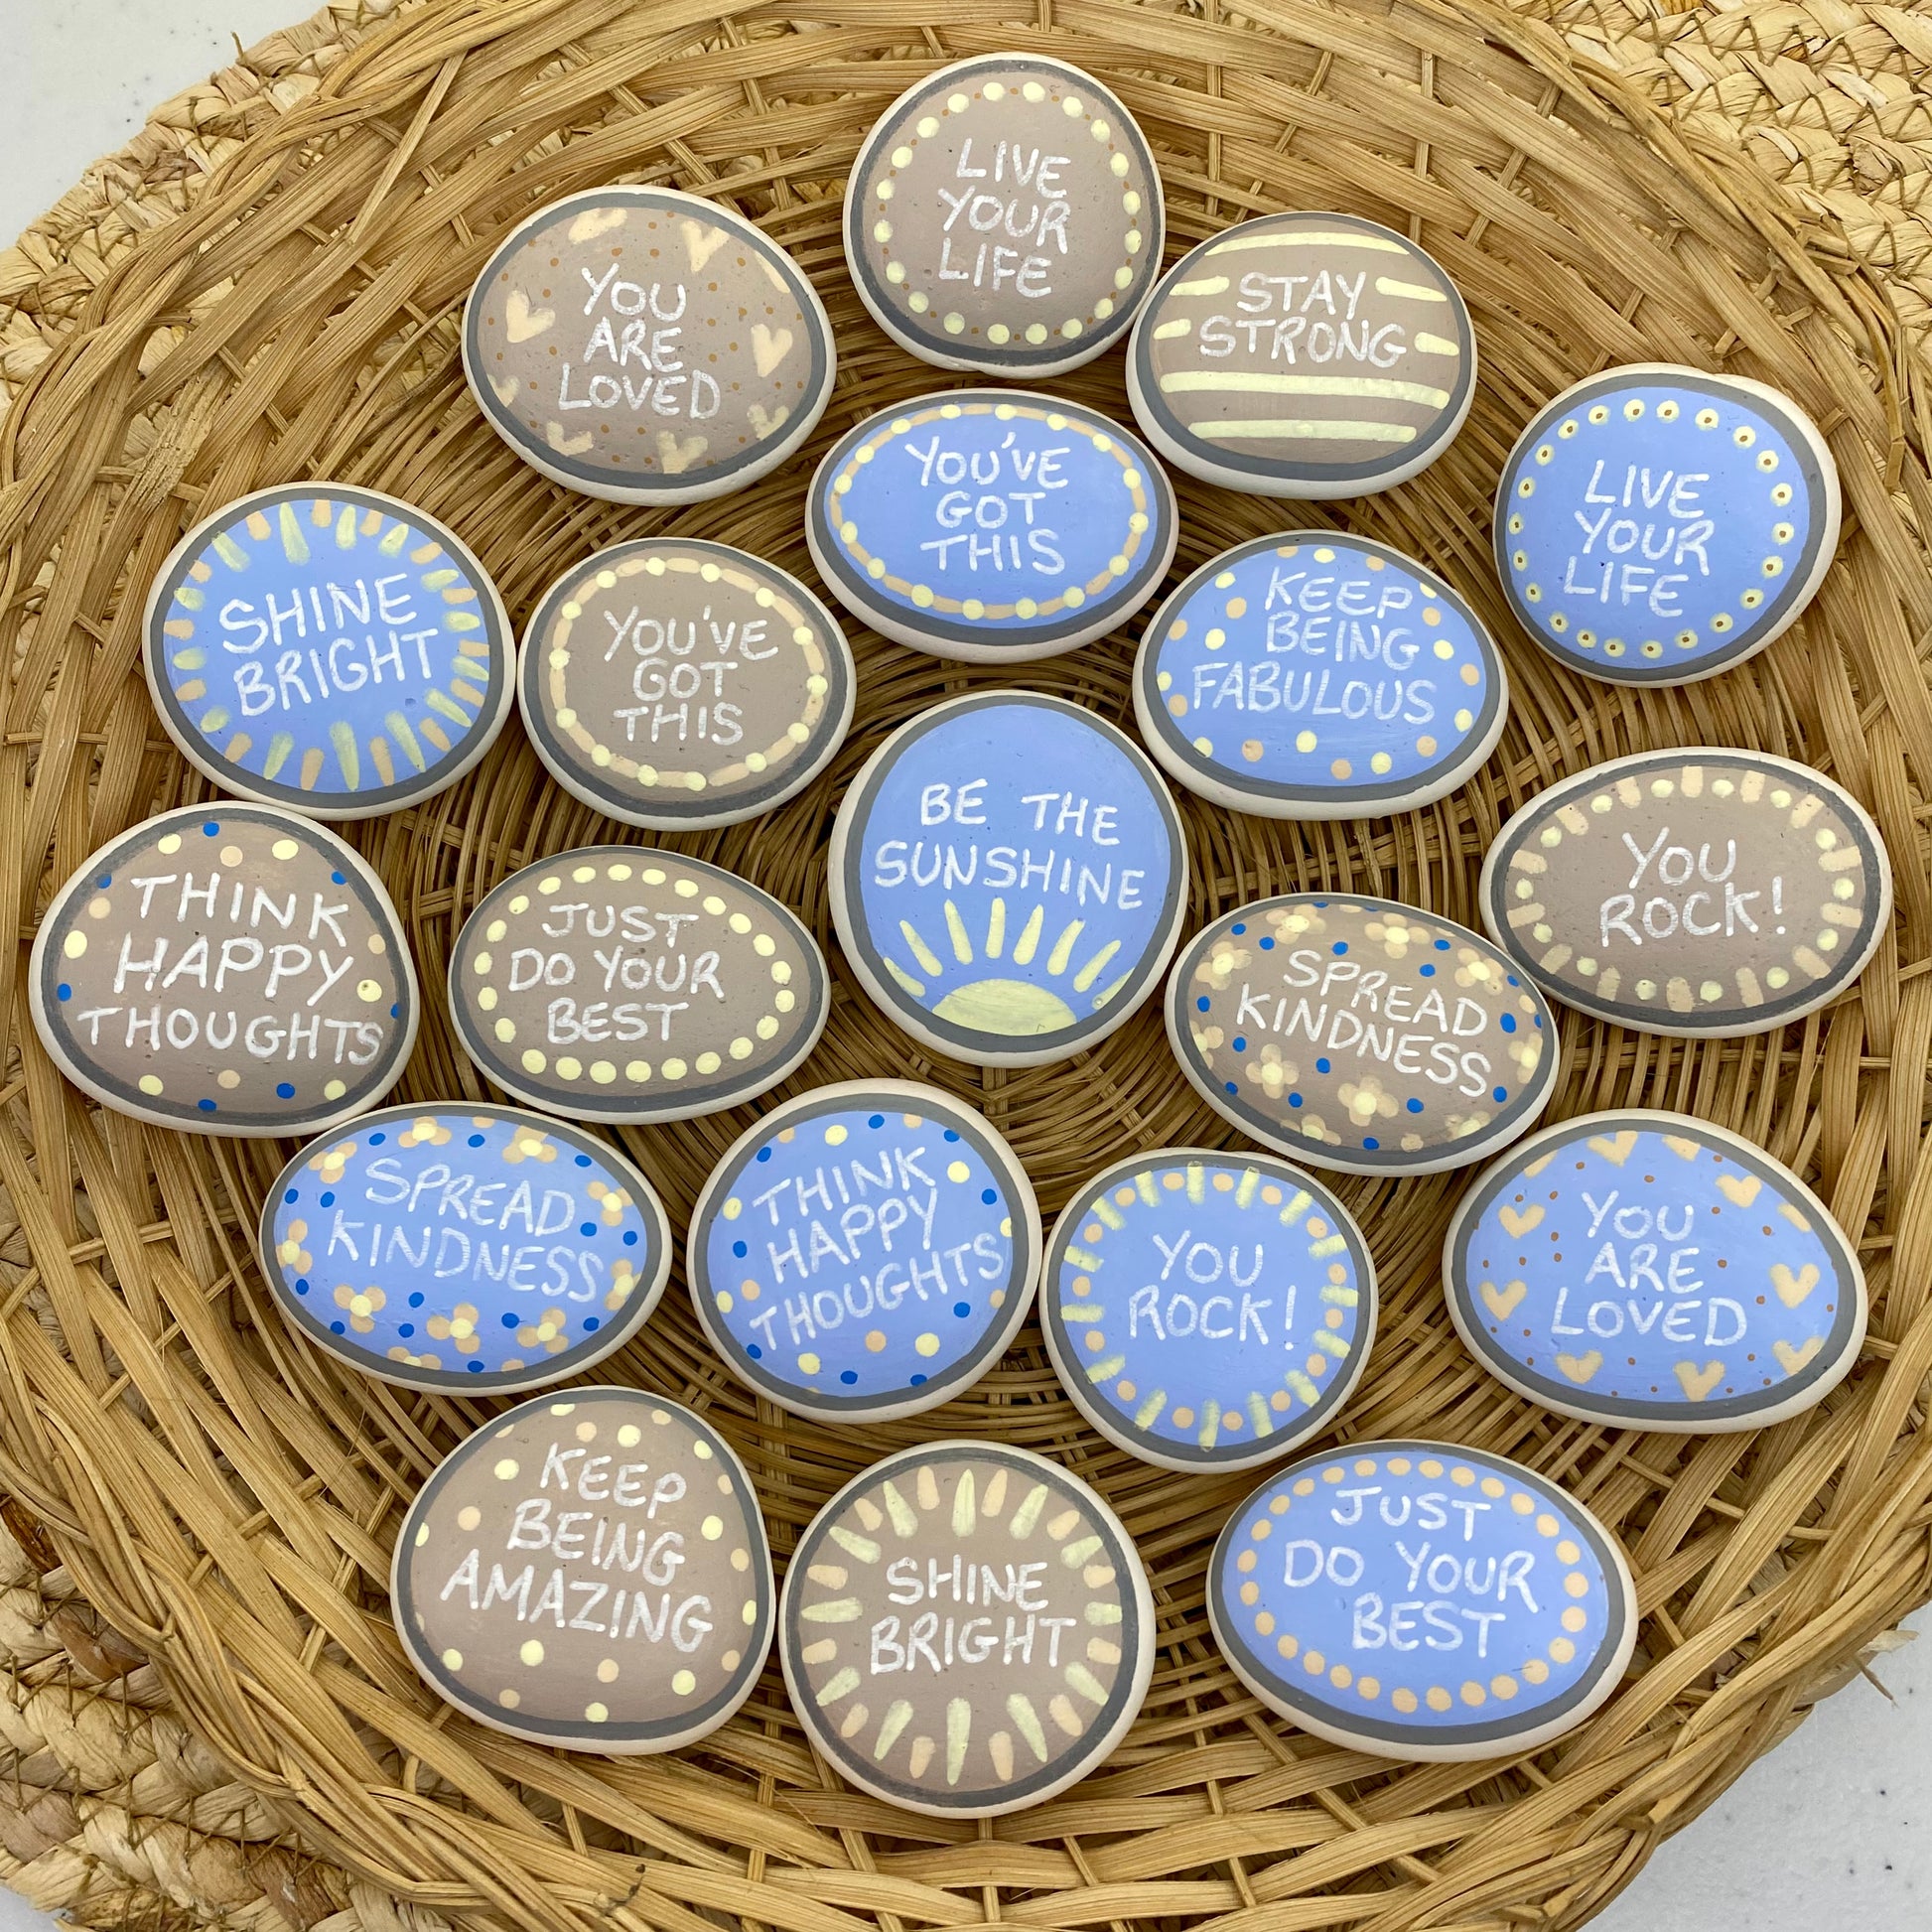 Lots of Pastel Blue and Beige Hand painted pebbles with uplifting affirmations written on